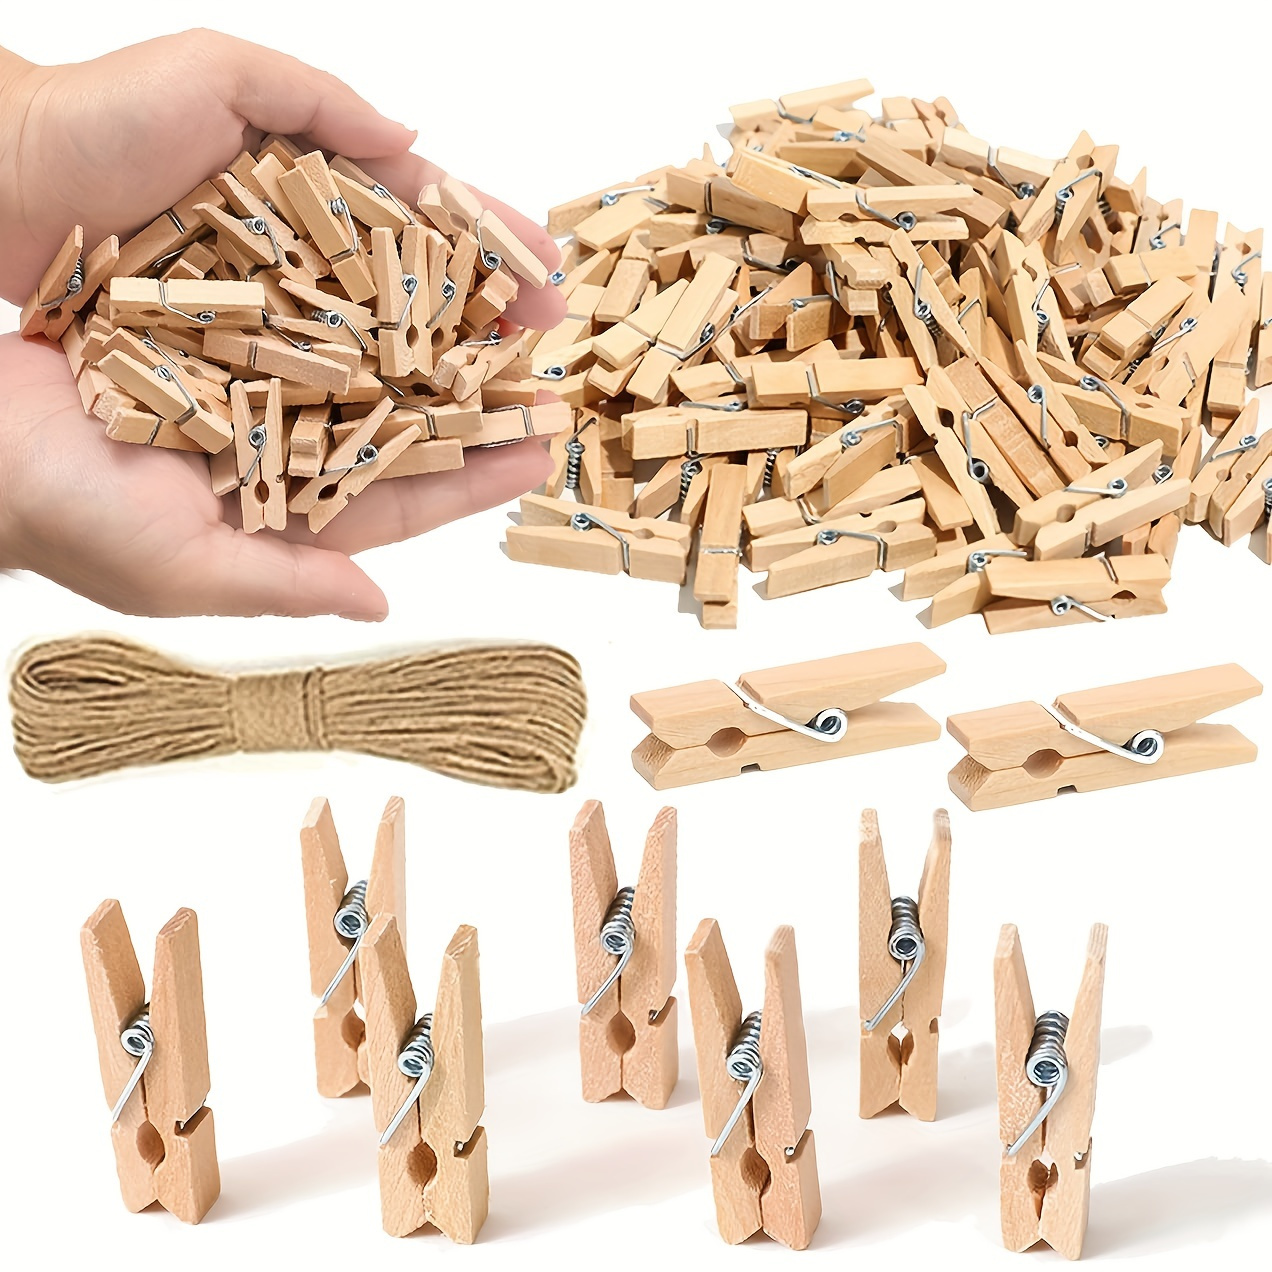 100pcs 1 Inch Mini Pins, Wooden Craft Clothes Pins, Small Picture Holders  For Crafts, Parties, Displaying Artwork, Hanging Decorative Small Cards Pins